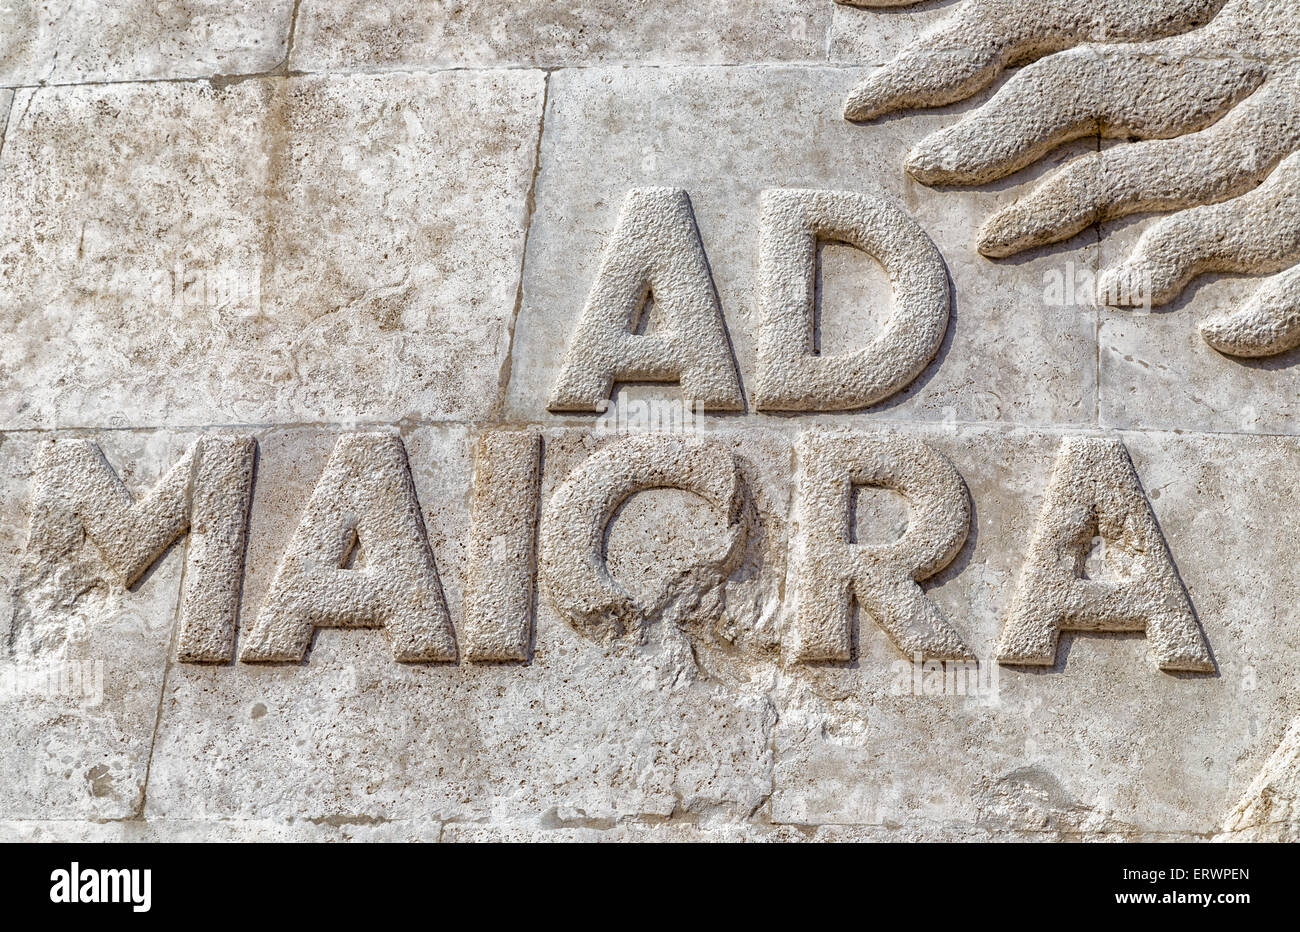 the-latin-sentence-ad-maiora-set-in-stone-in-capital-letters-means-literally-to-greater